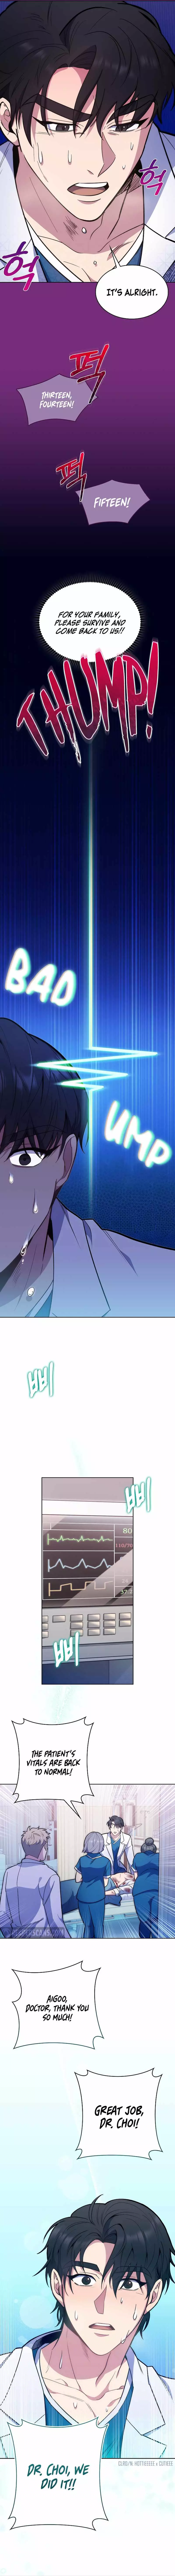 Level-Up Doctor (Manhwa) - 22 page 6-969627cc